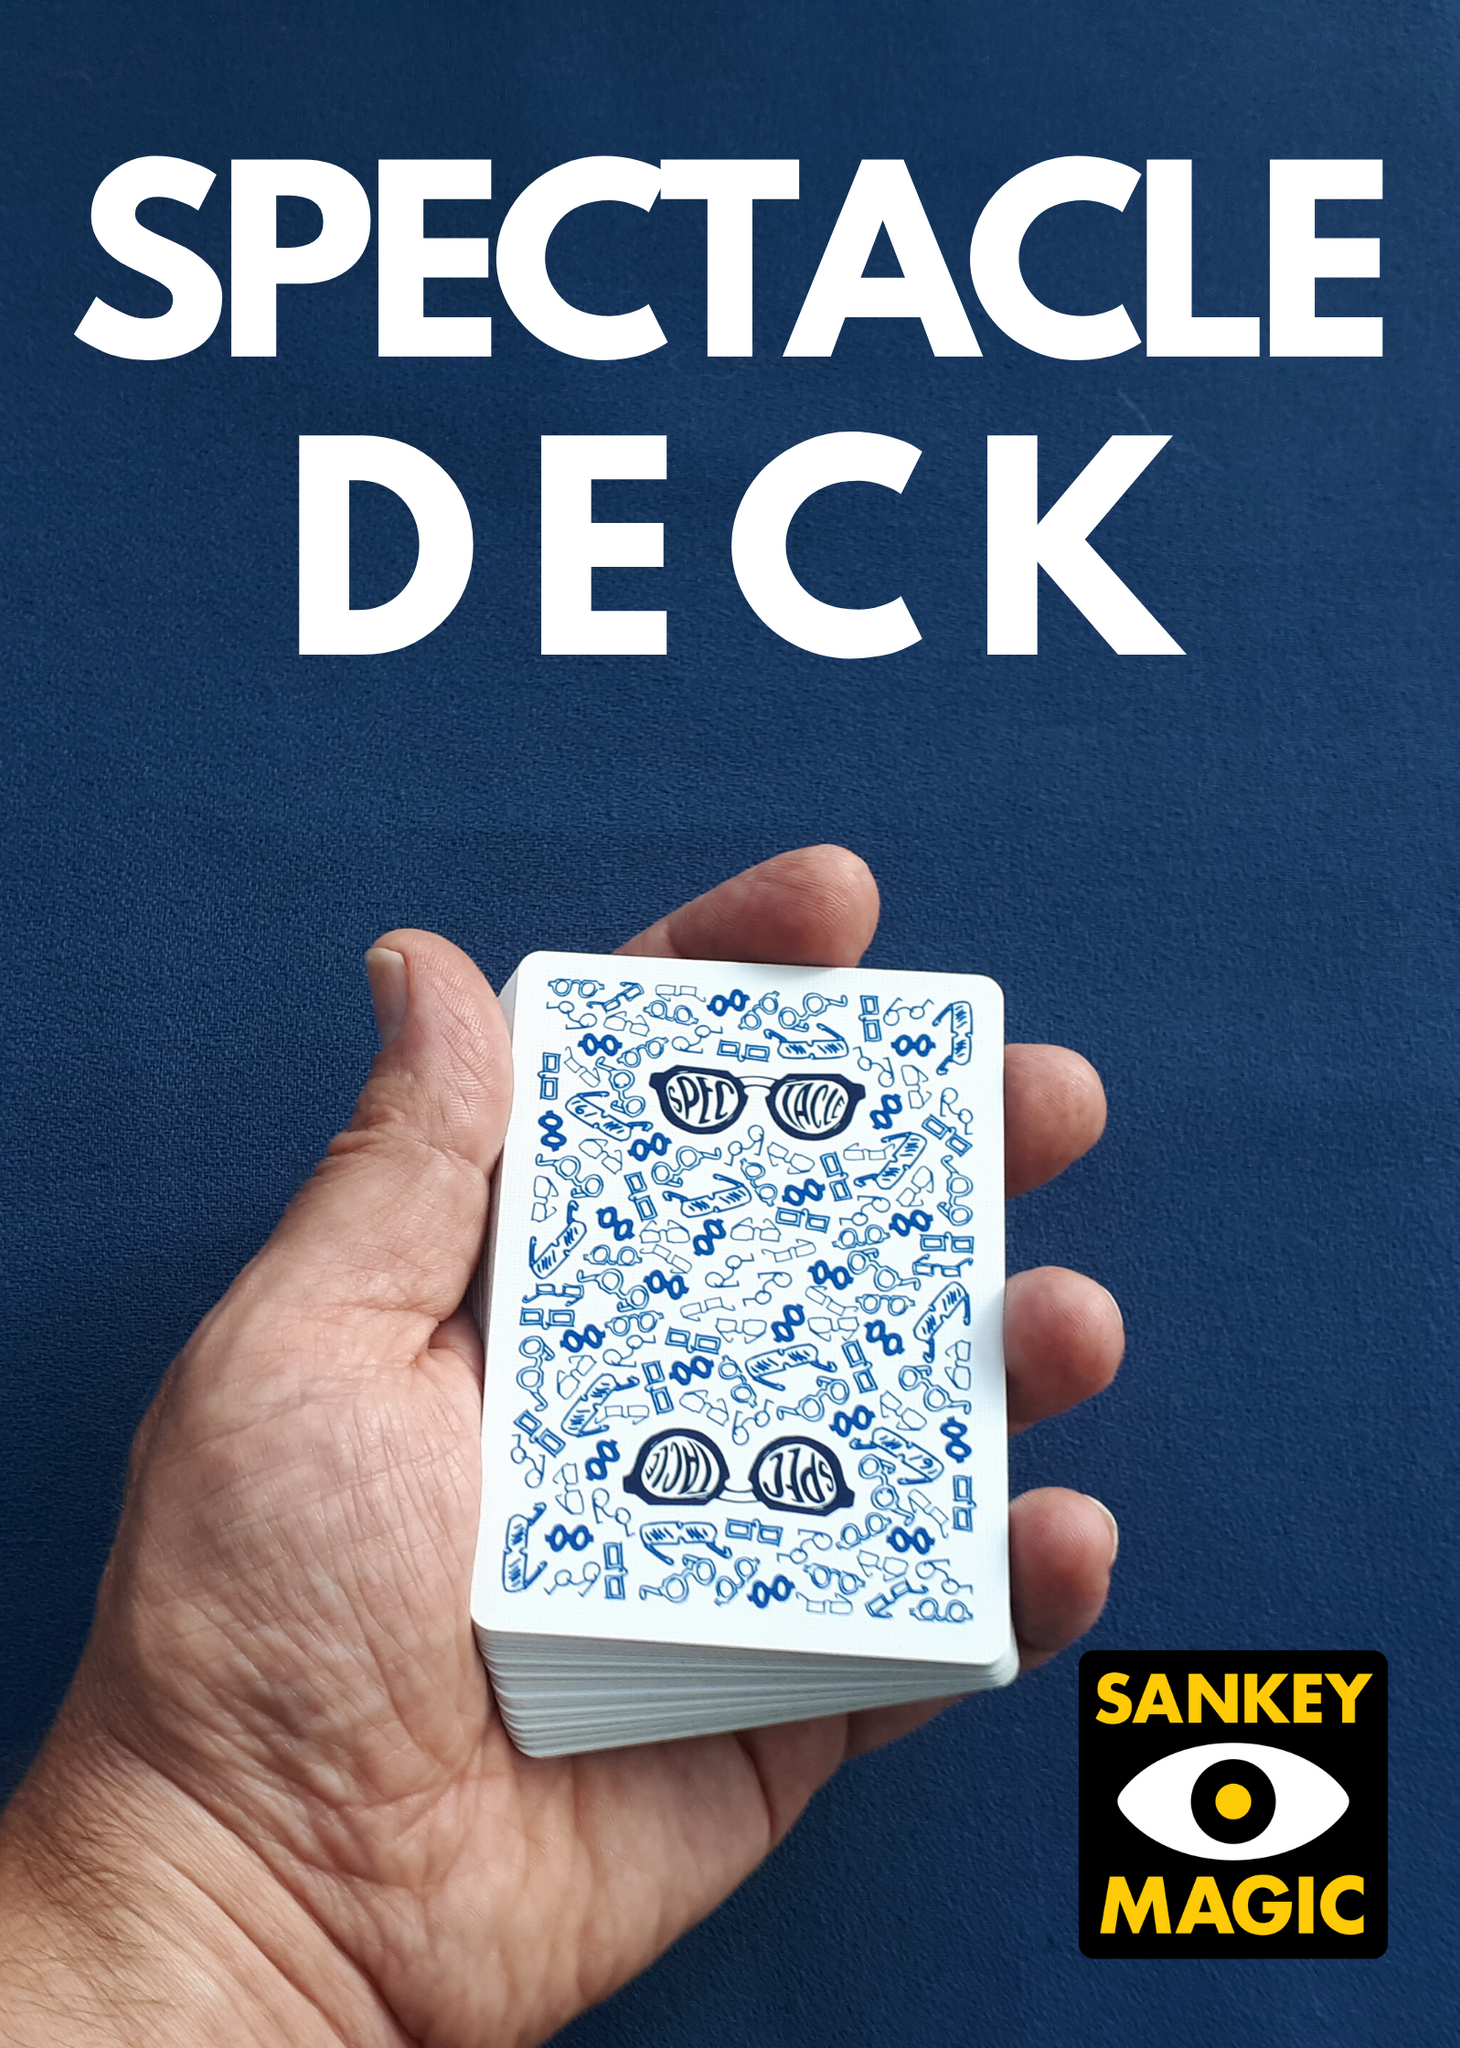 SPECTACLE DECK